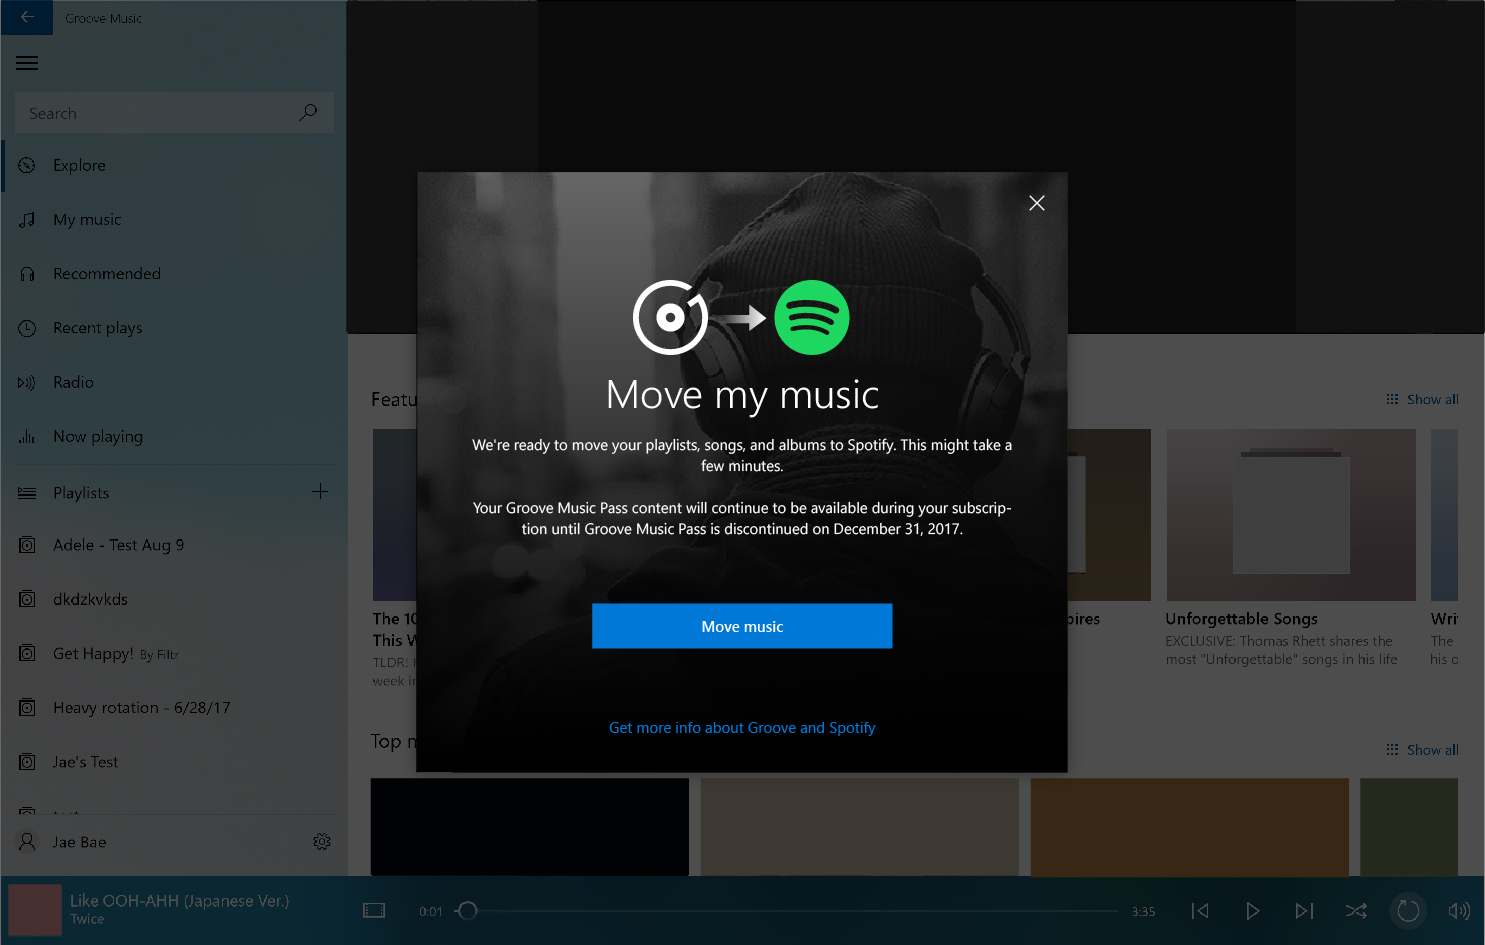 Prompt to move music from Groove to Spotify